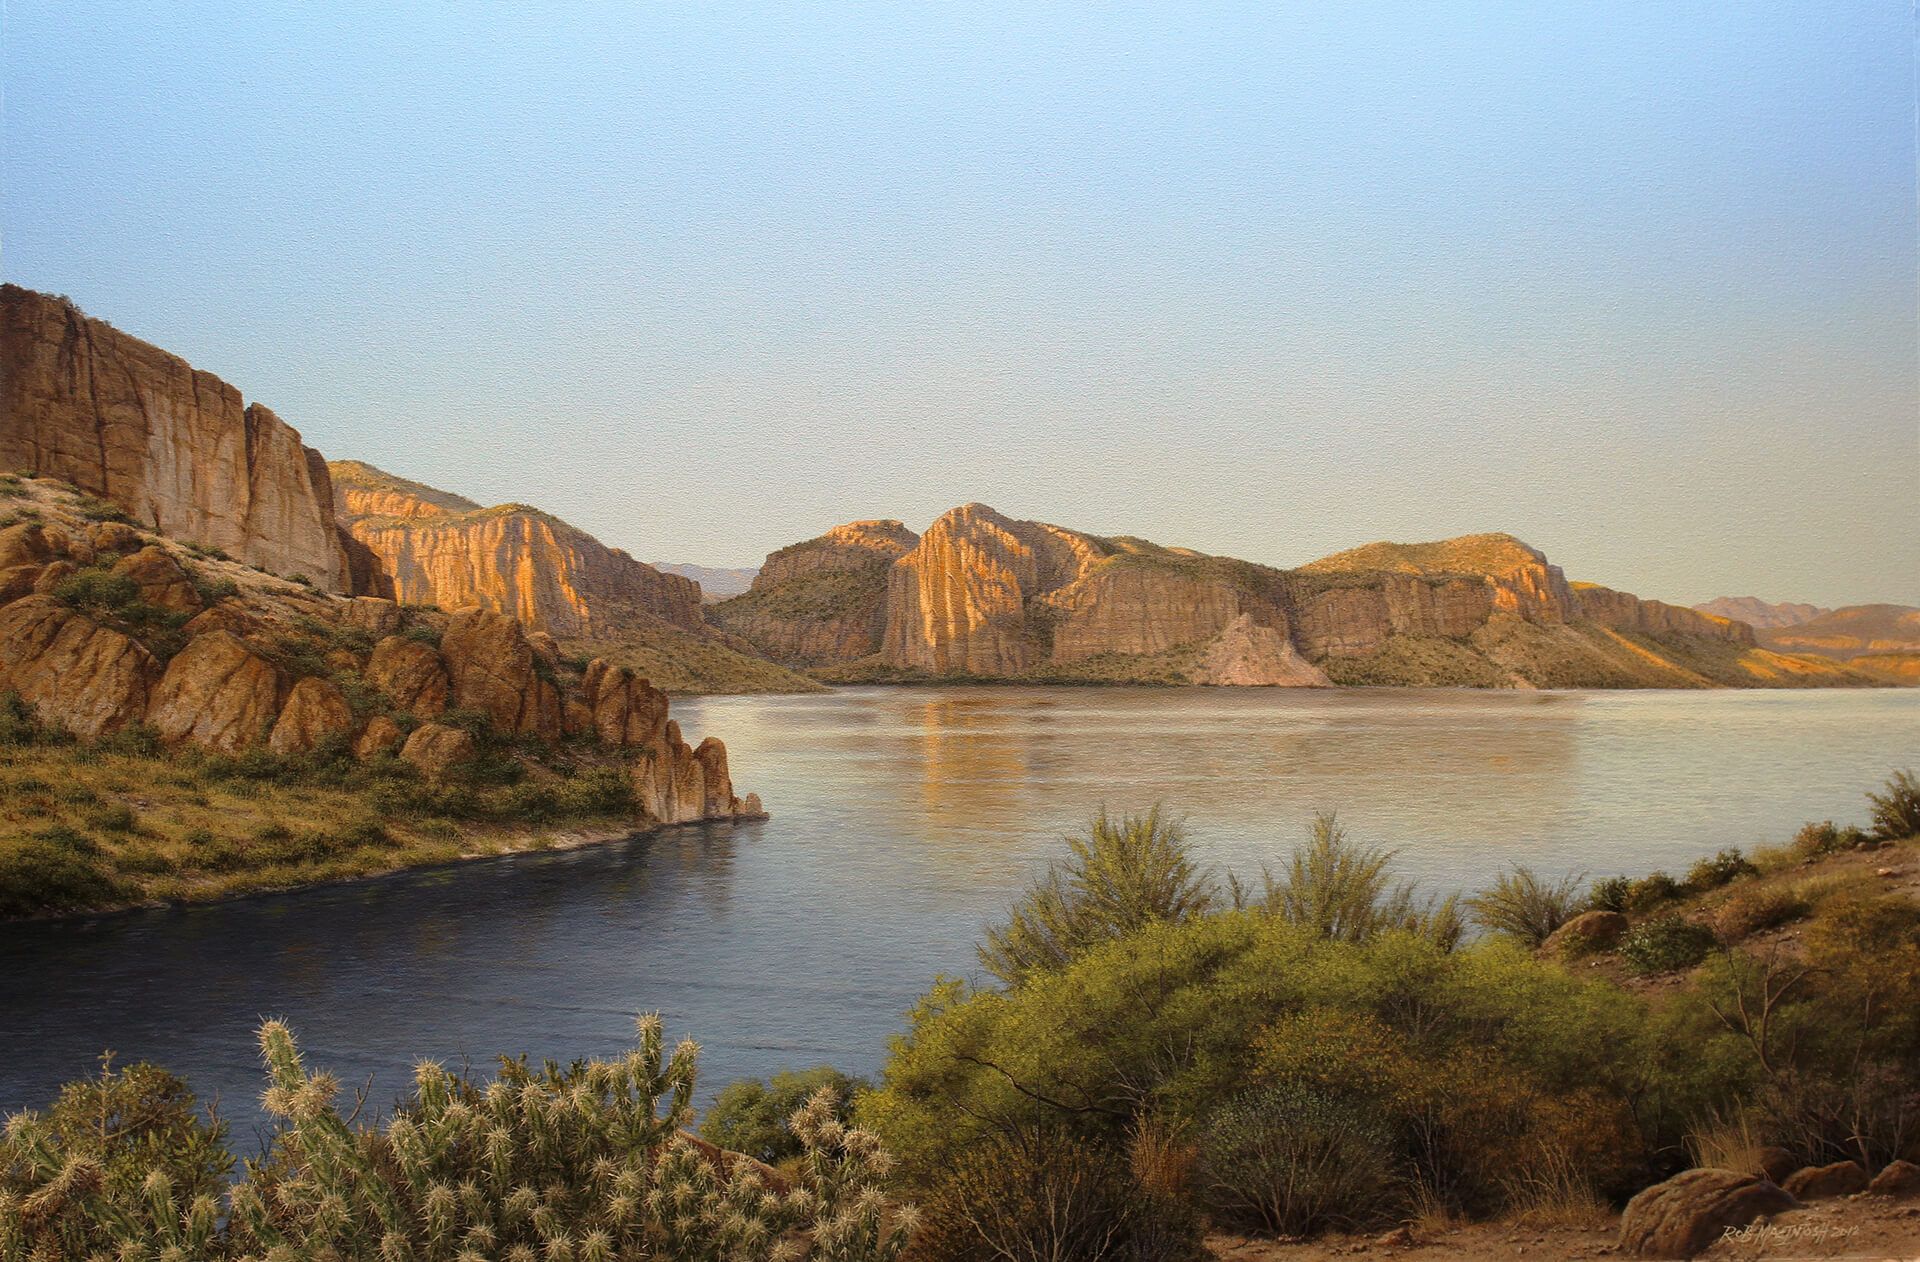 Photorealistic painting of a lake surrounded by canyons